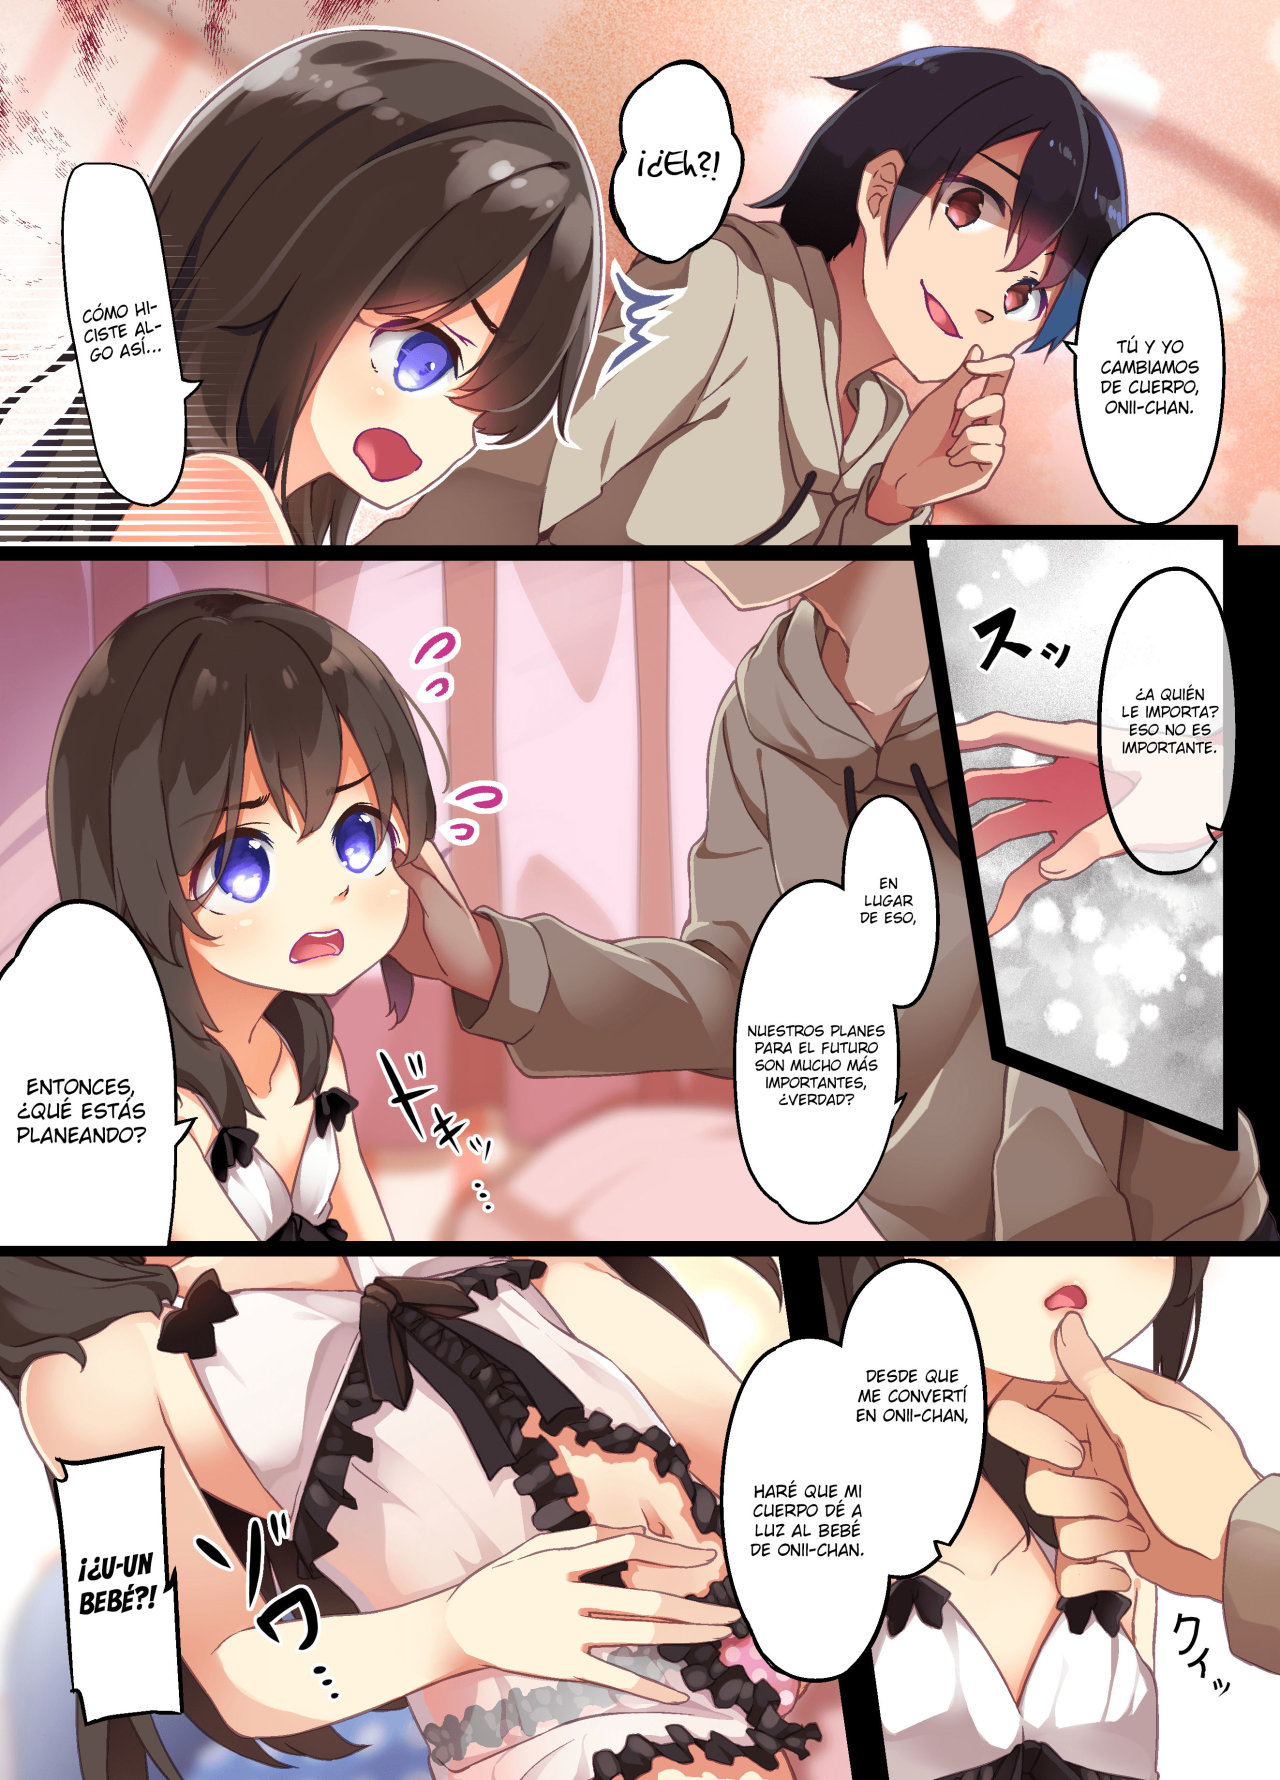 A Yandere Little Sister wants to be impregnated by her big brother - 10